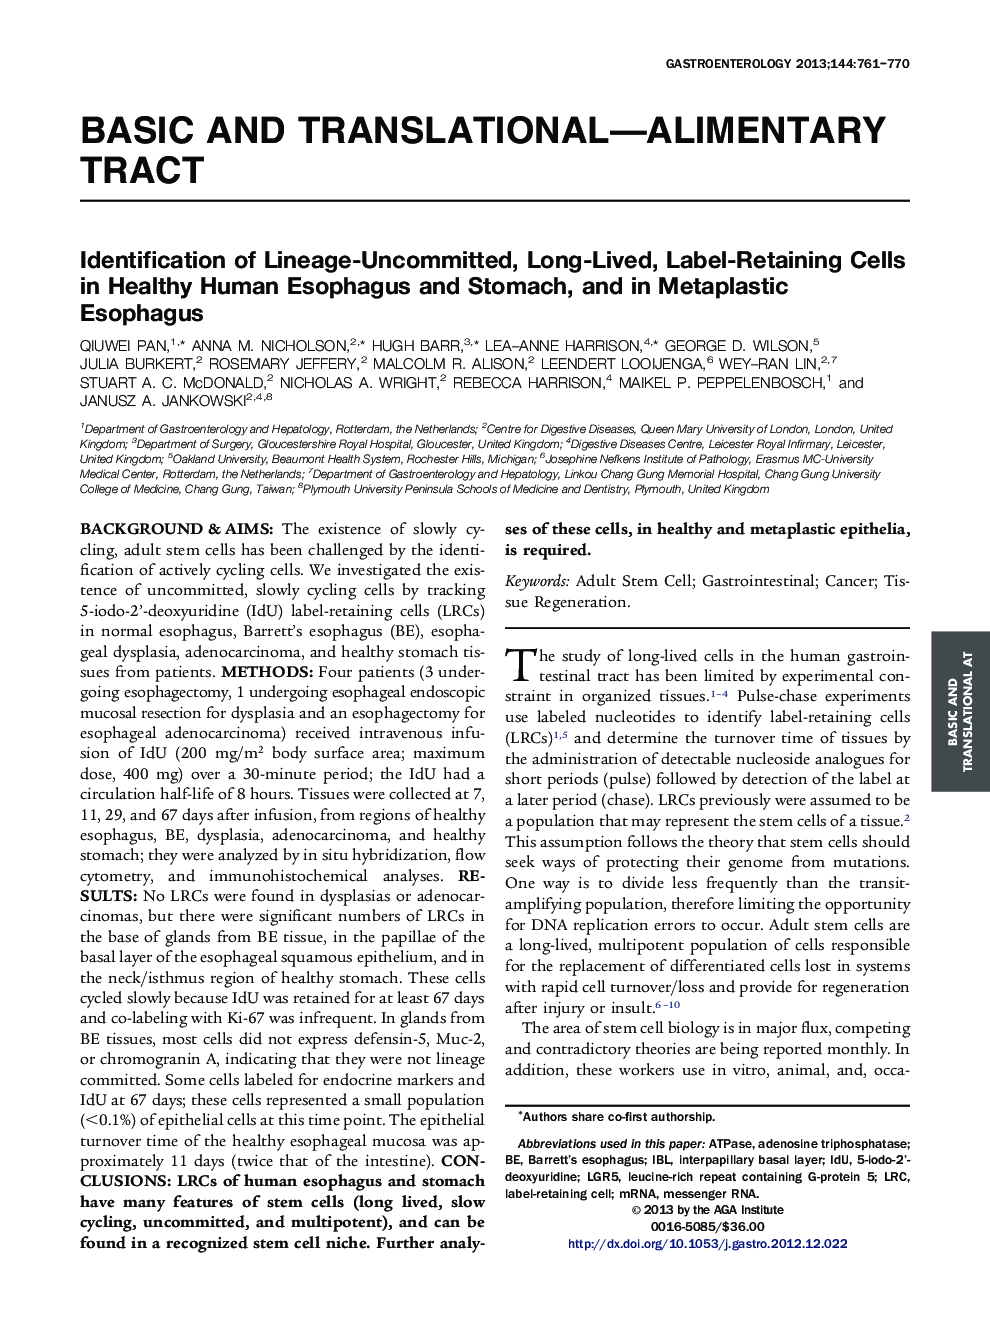 Identification of Lineage-Uncommitted, Long-Lived, Label-Retaining Cells in Healthy Human Esophagus and Stomach, and in Metaplastic Esophagus 